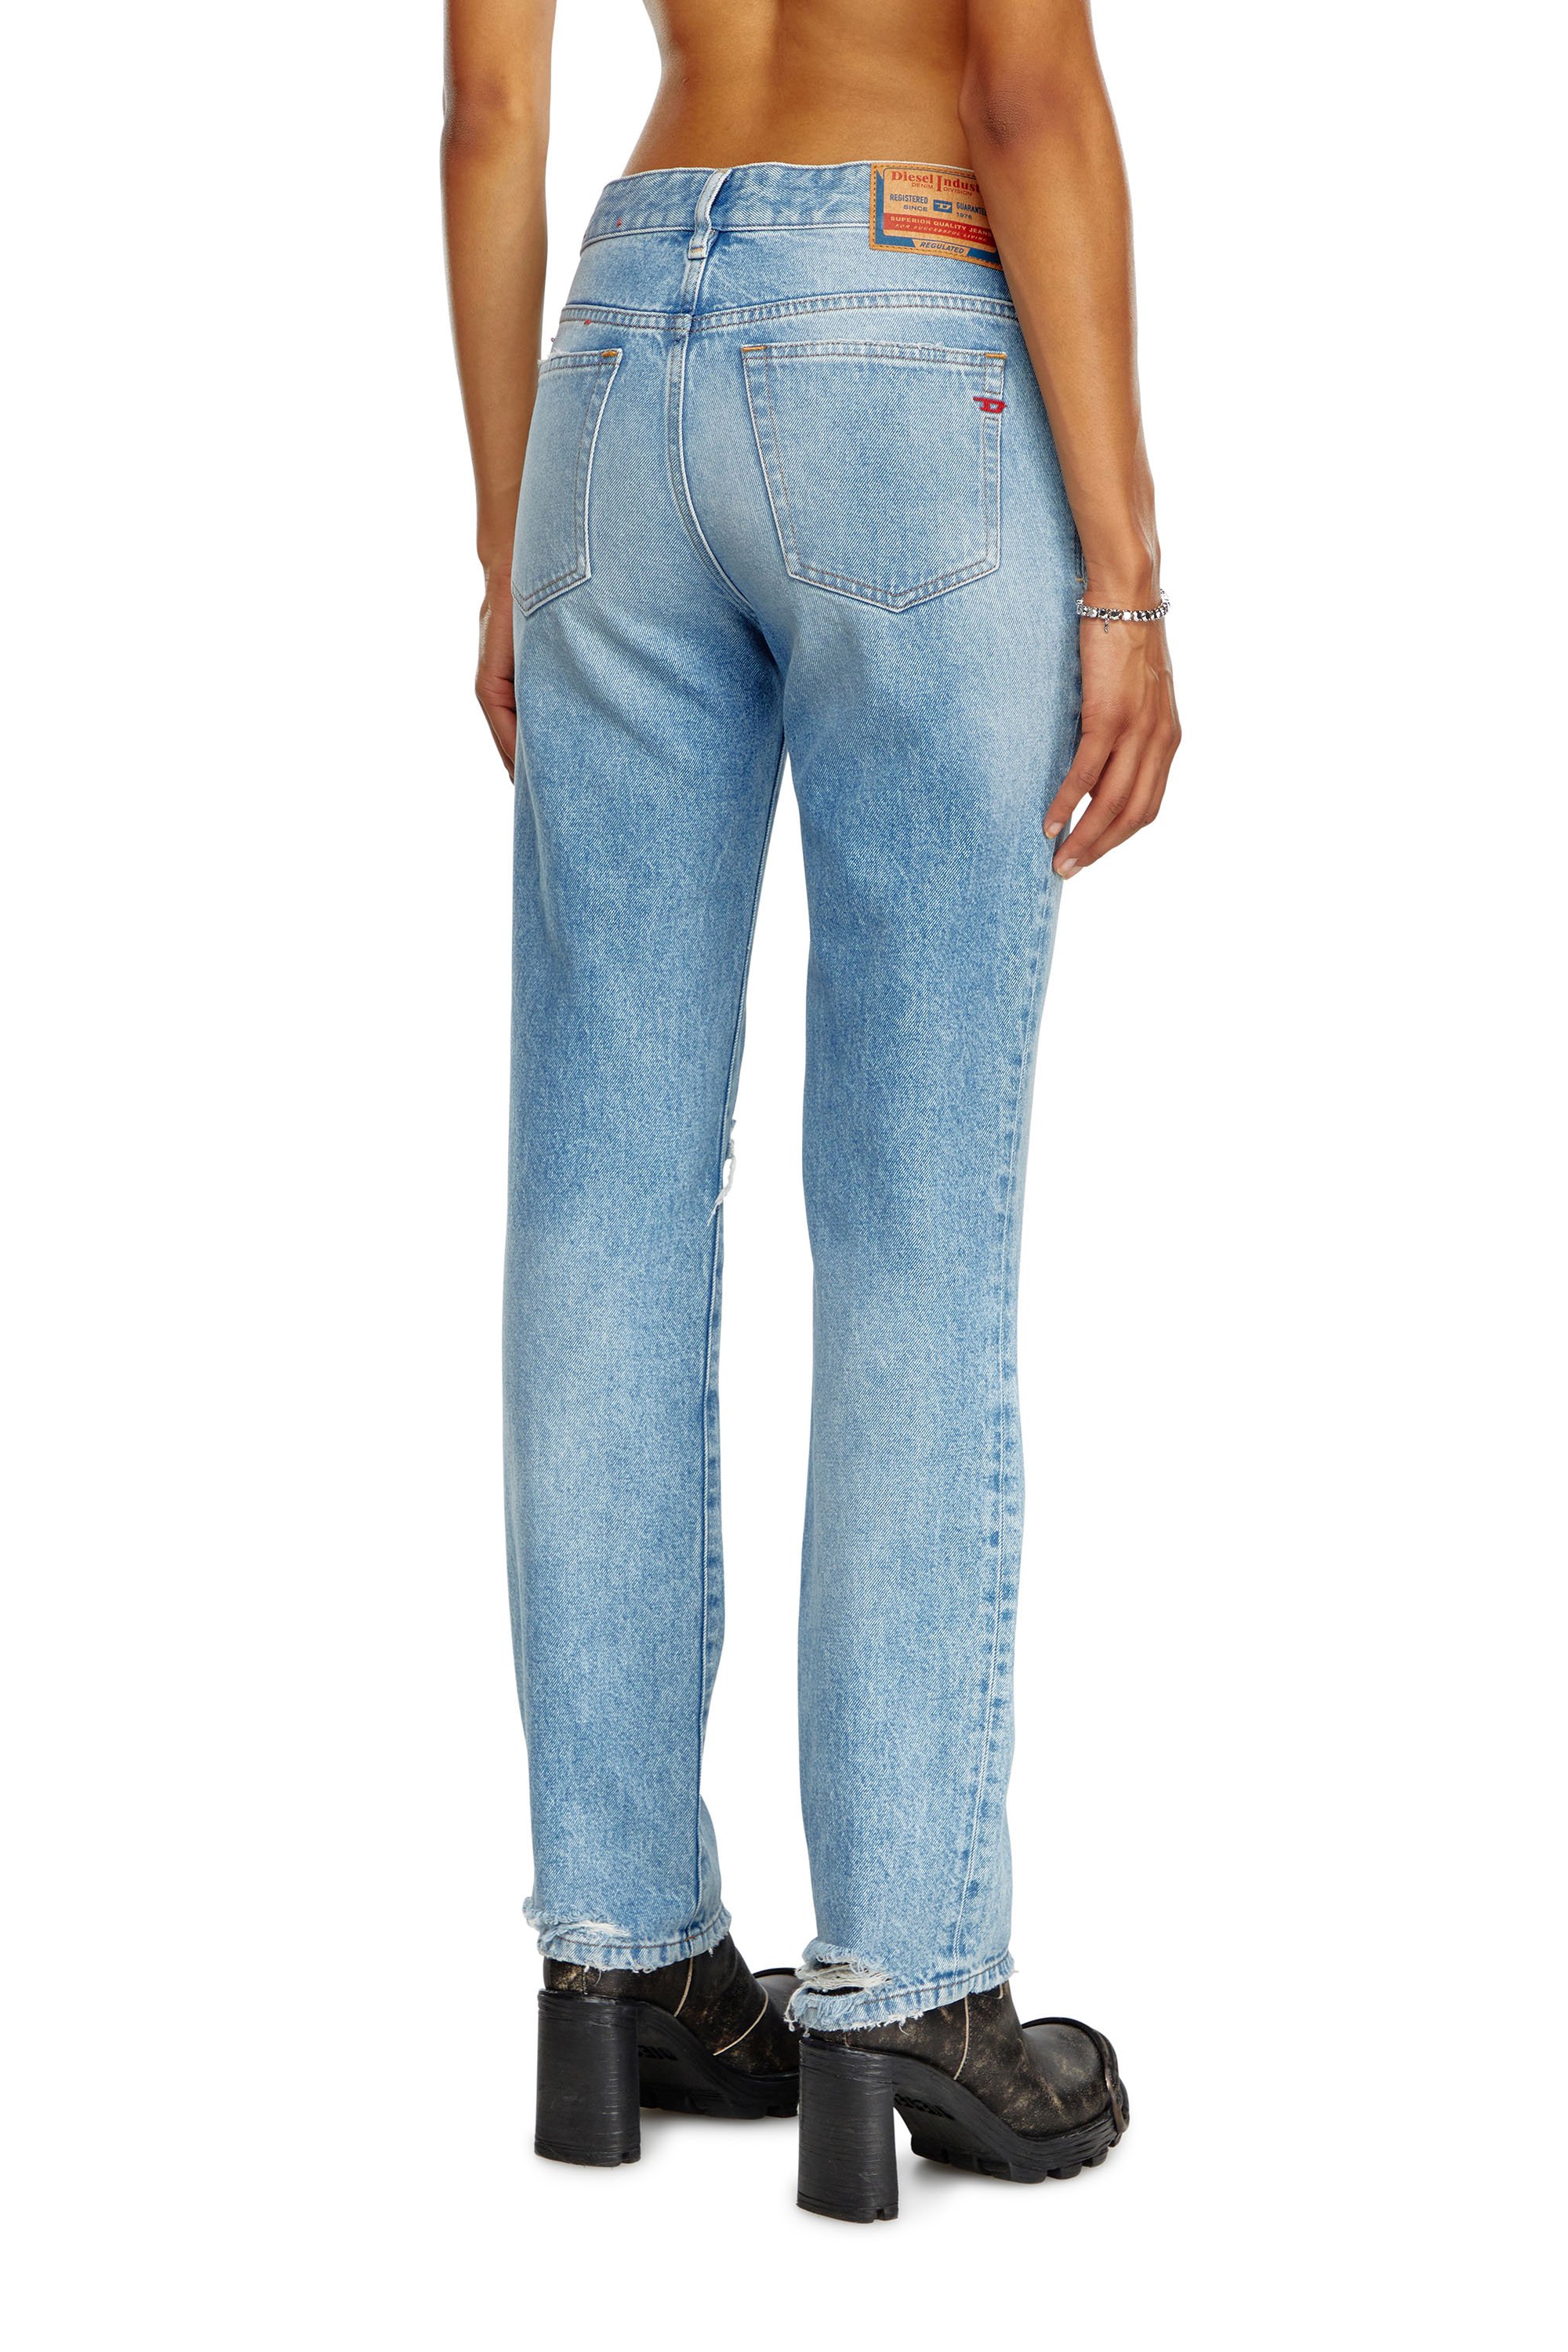 Diesel - Straight Jeans 1989 D-Mine 09J80, Mujer Straight Jeans - 1989 D-Mine in Azul marino - Image 3